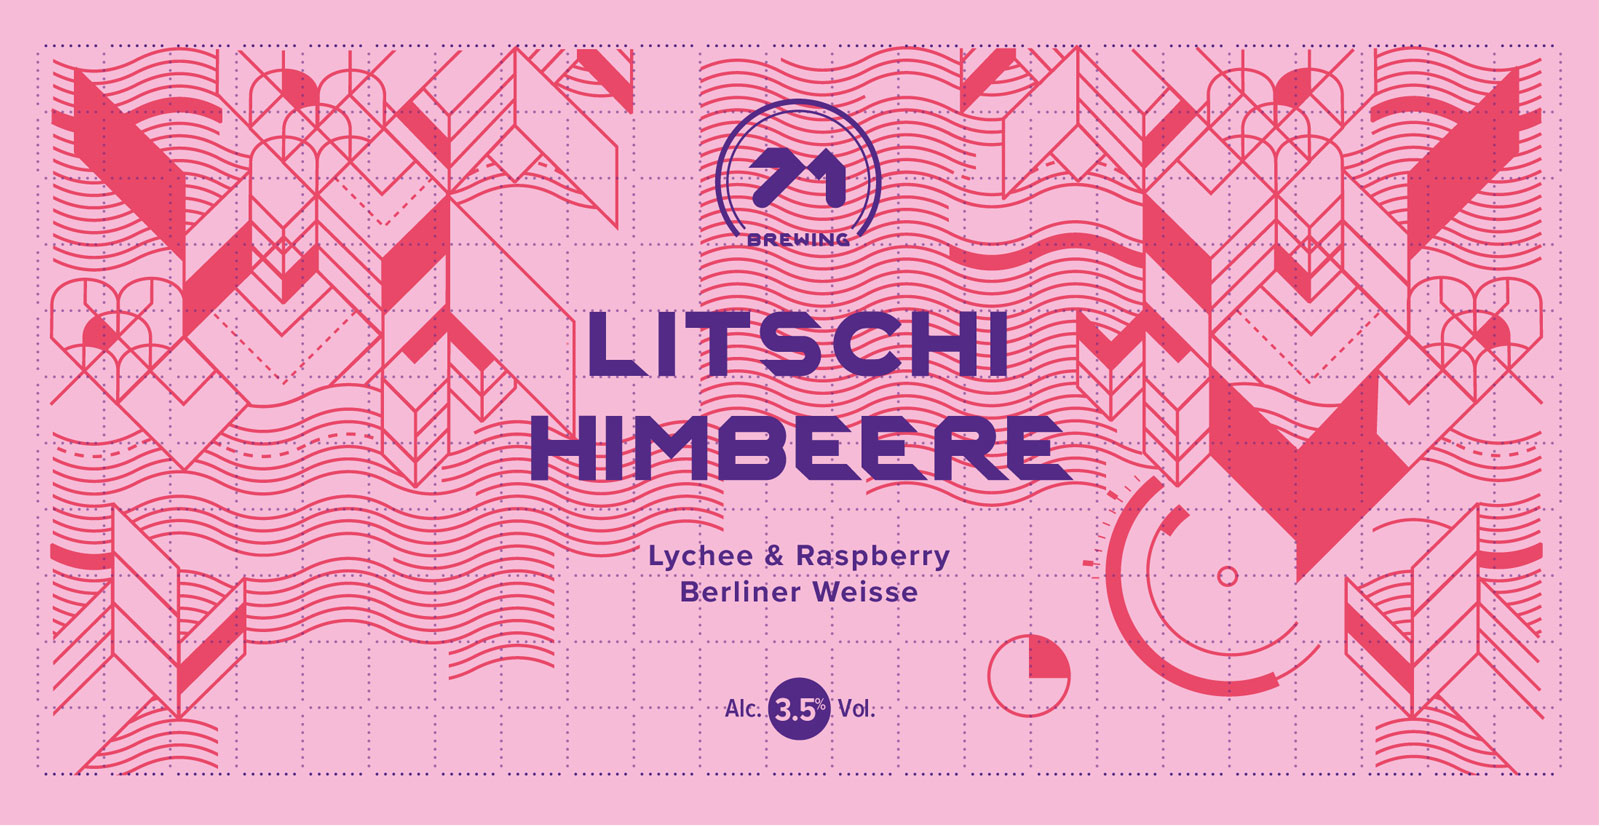 Label for Litschi Himbeere a lychee and raspberry Berliner weisse beer. Deep purple logo and typography ontop of a pink geometric pattern and pale pink background.